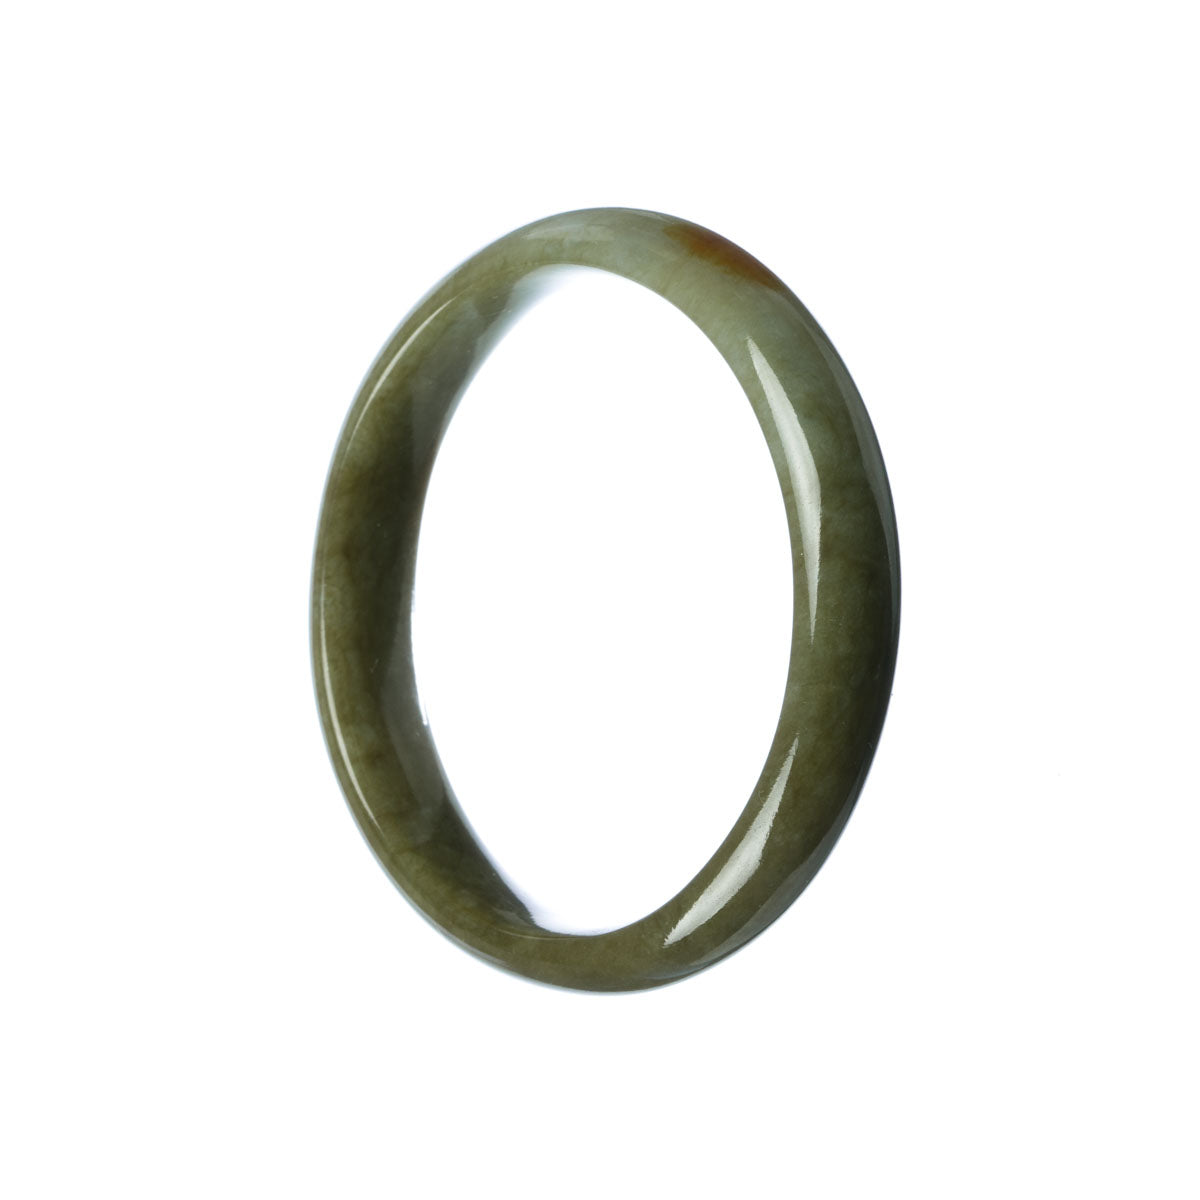 A beautiful jade bangle bracelet with a half moon design, crafted from genuine grade A green brown jade. Perfect for adding an elegant touch to any outfit.